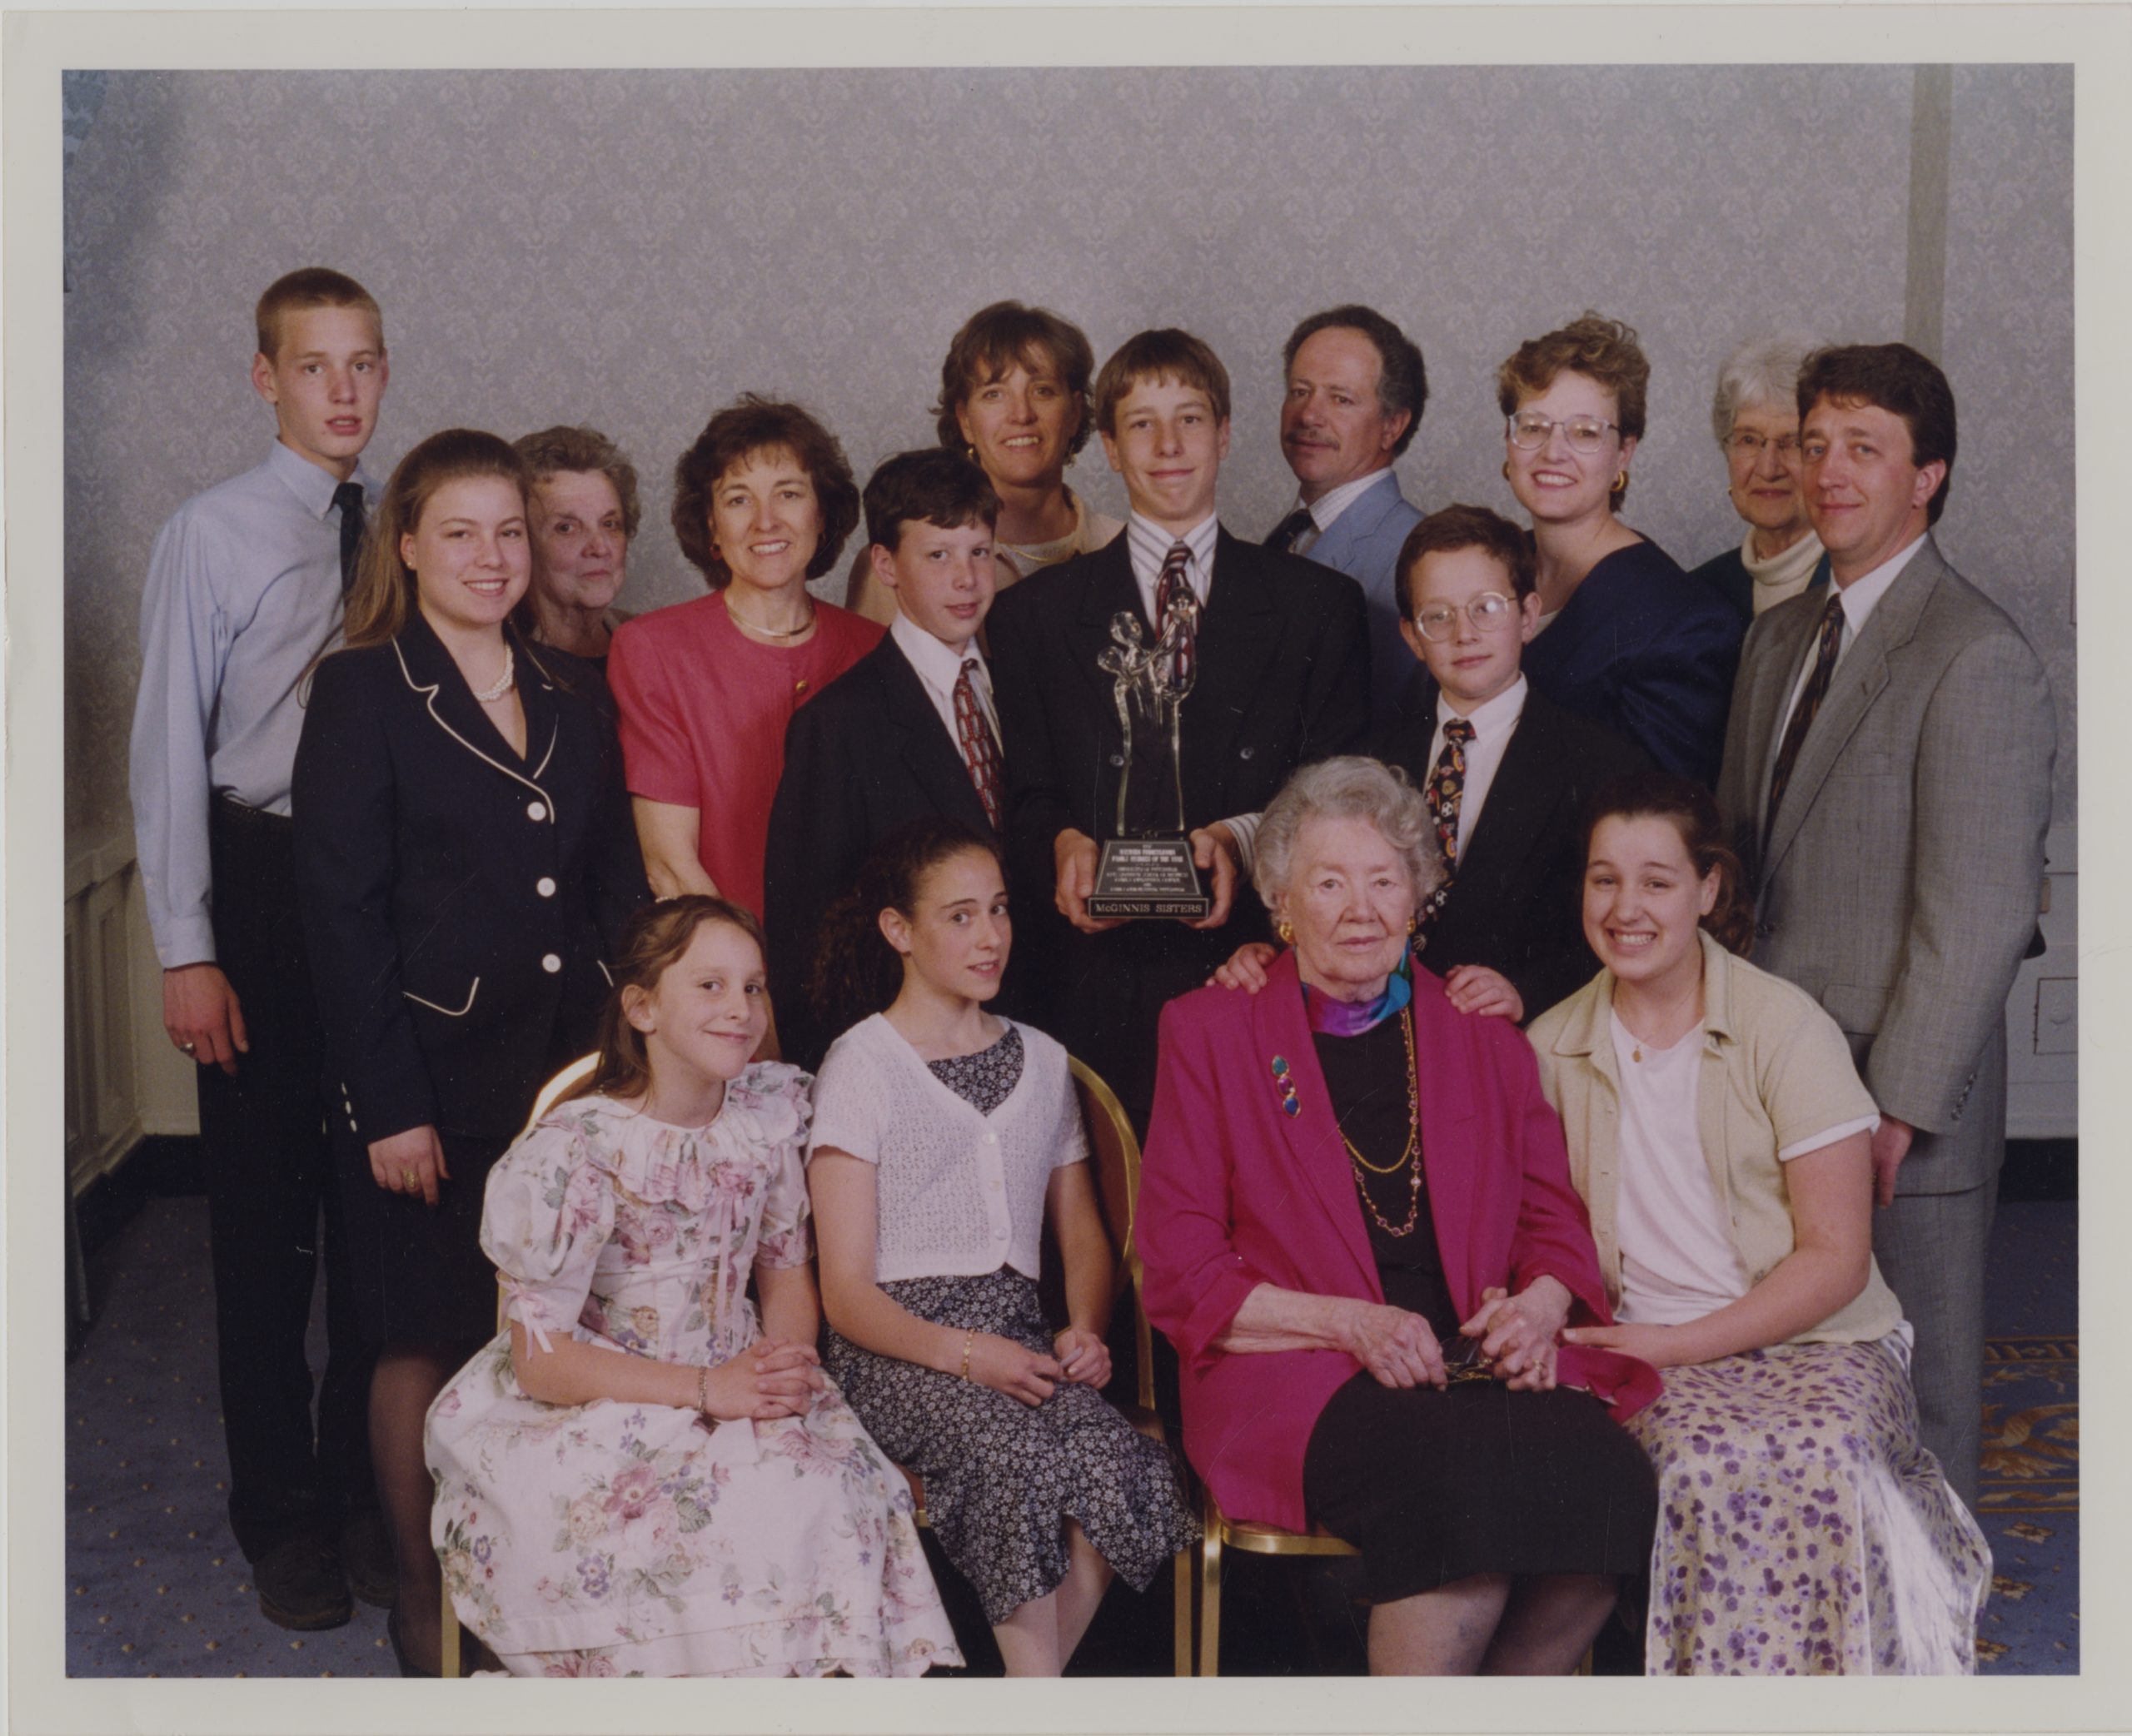 Rosella McGinnis with her children, grandchildren, and extended family, 1997.